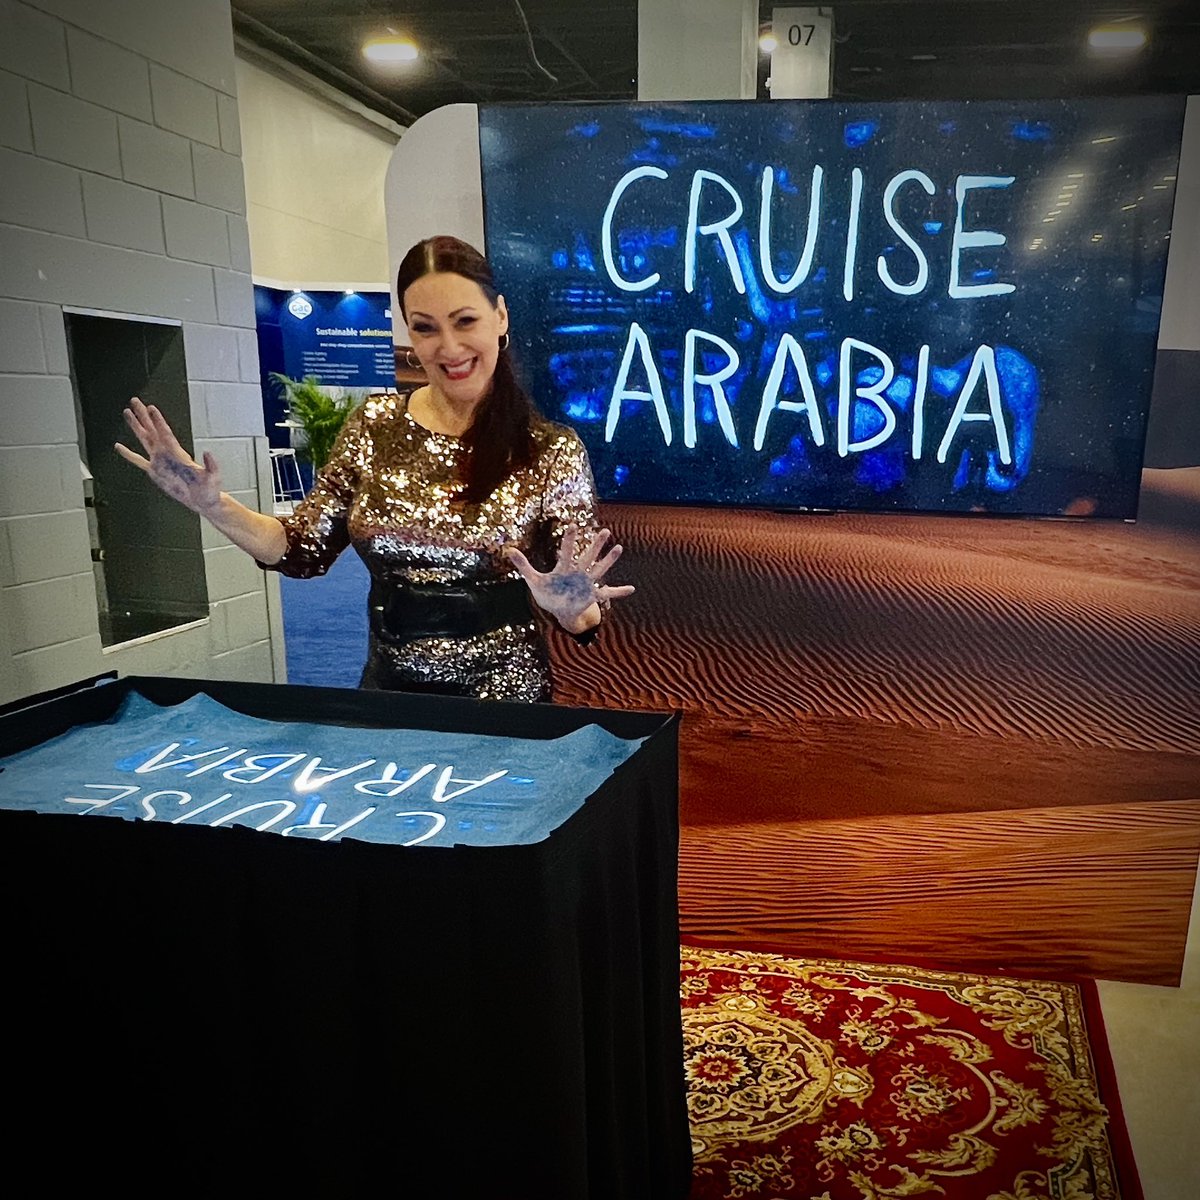 Last chance to see me perform at Seatrade Cruise Global Miami Beach! Cruise Arabia Booth 806 Last show 12:30!

🖐🏼✨🌊🚢✨
cruise-arabia.com
sand-artist.com

#sandartist #sandanimation #sandstory #storytelling #art #artist #cruise #cruisearabia #seatradecruiseglobal